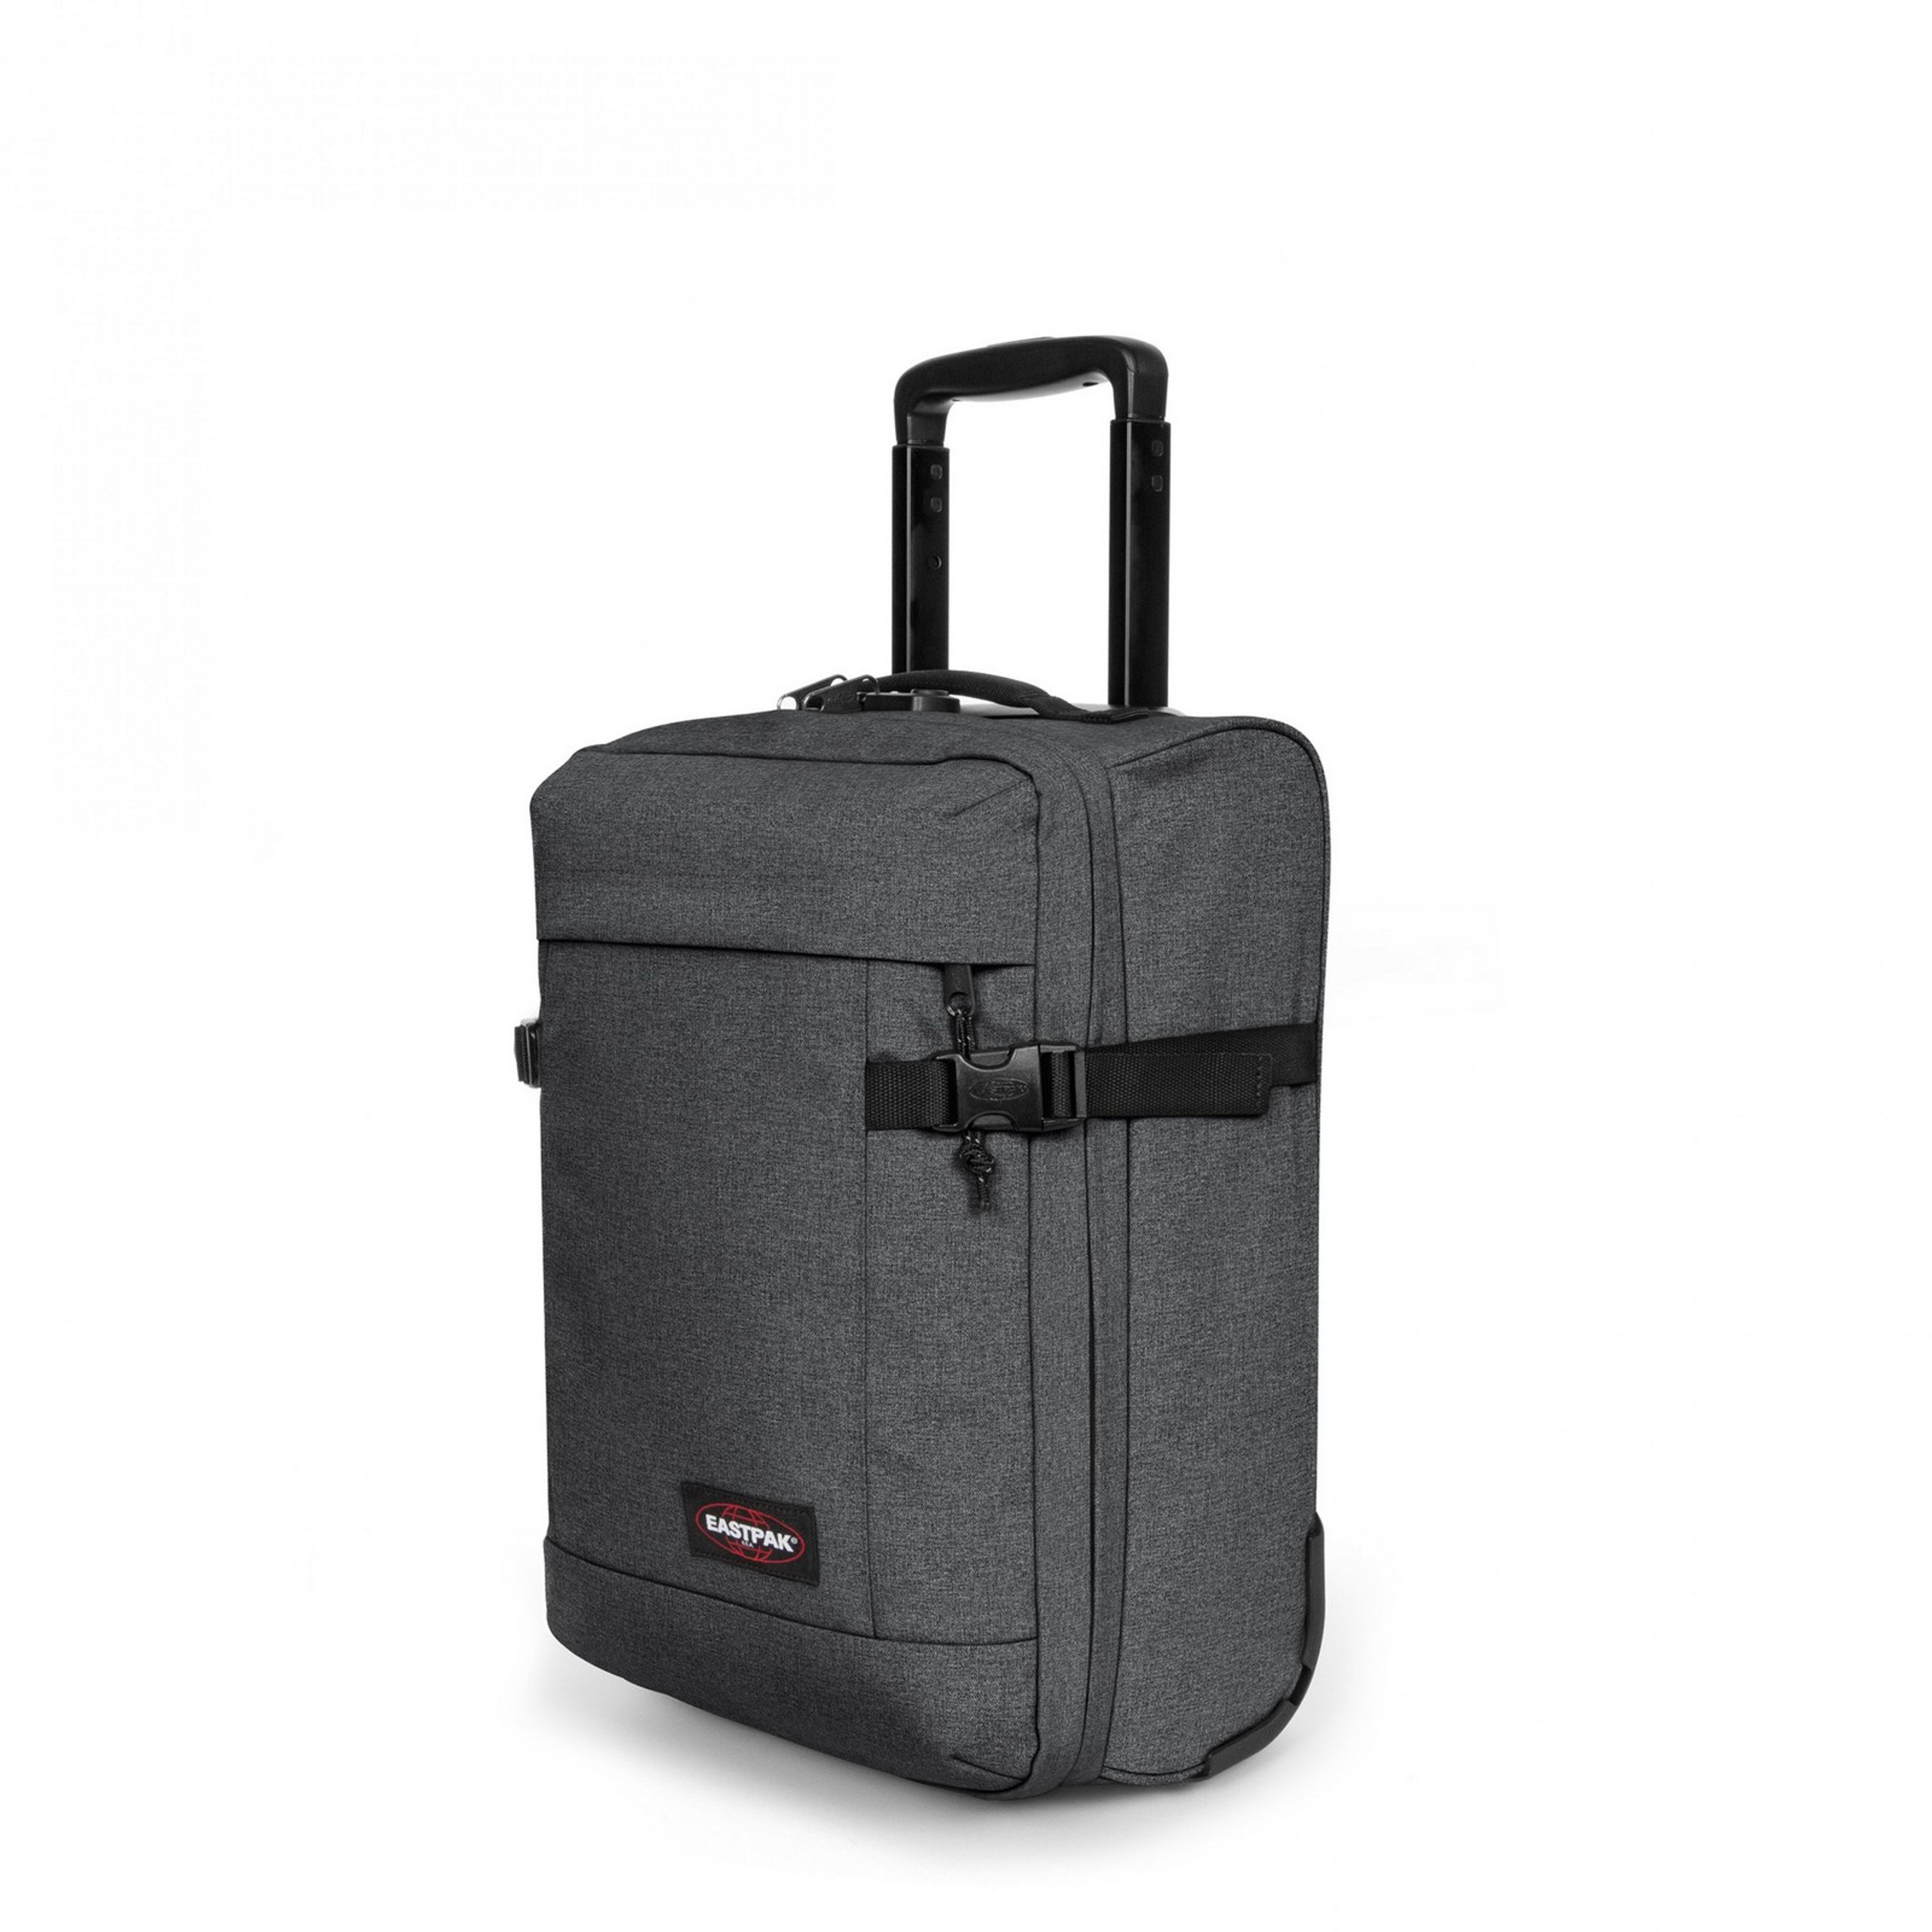 Eastpak Tranverz XXS 45cm Wheeled Duffle at Luggage Superstore